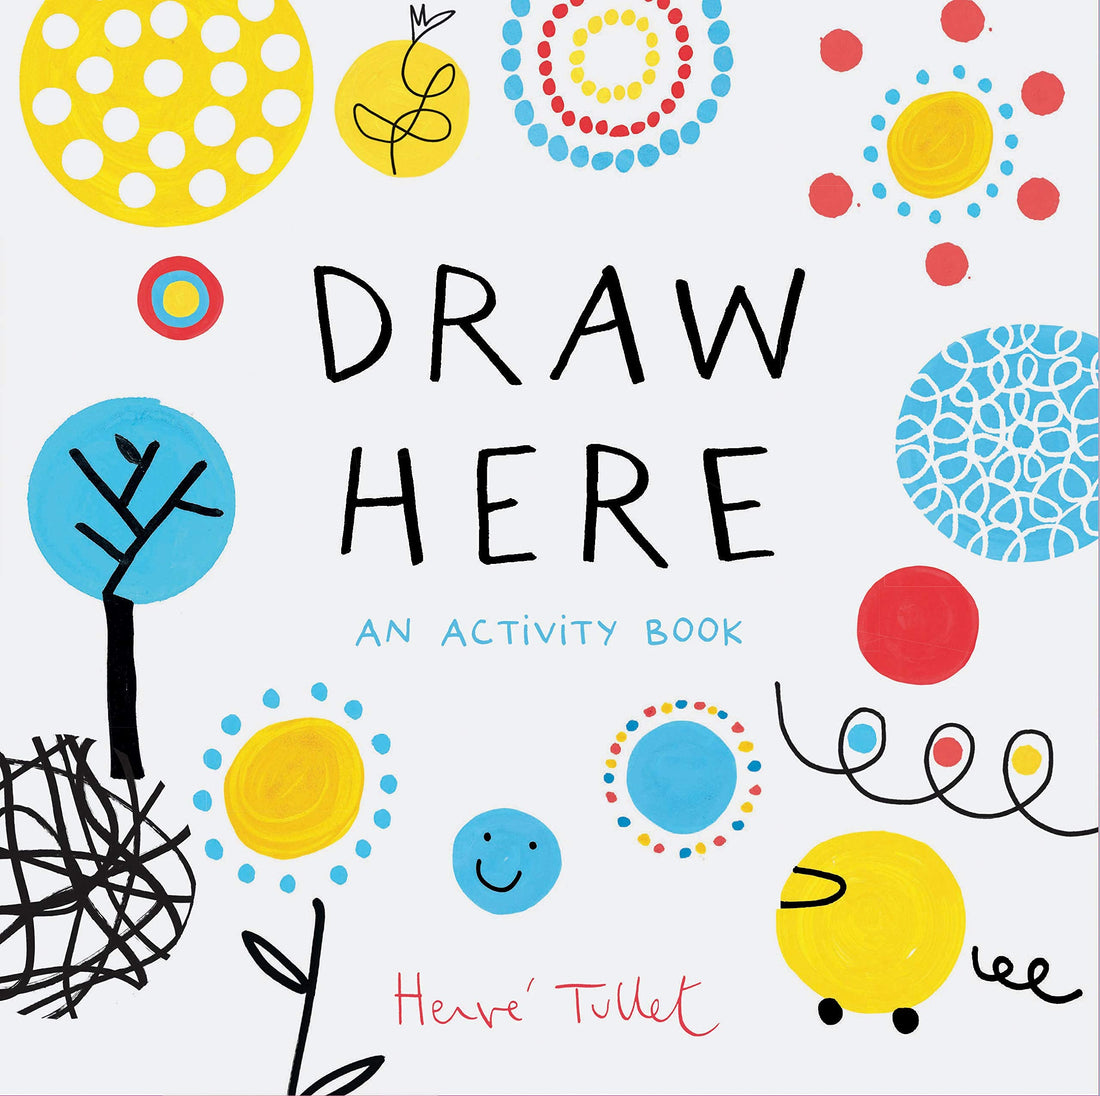 Draw Here Activity Book